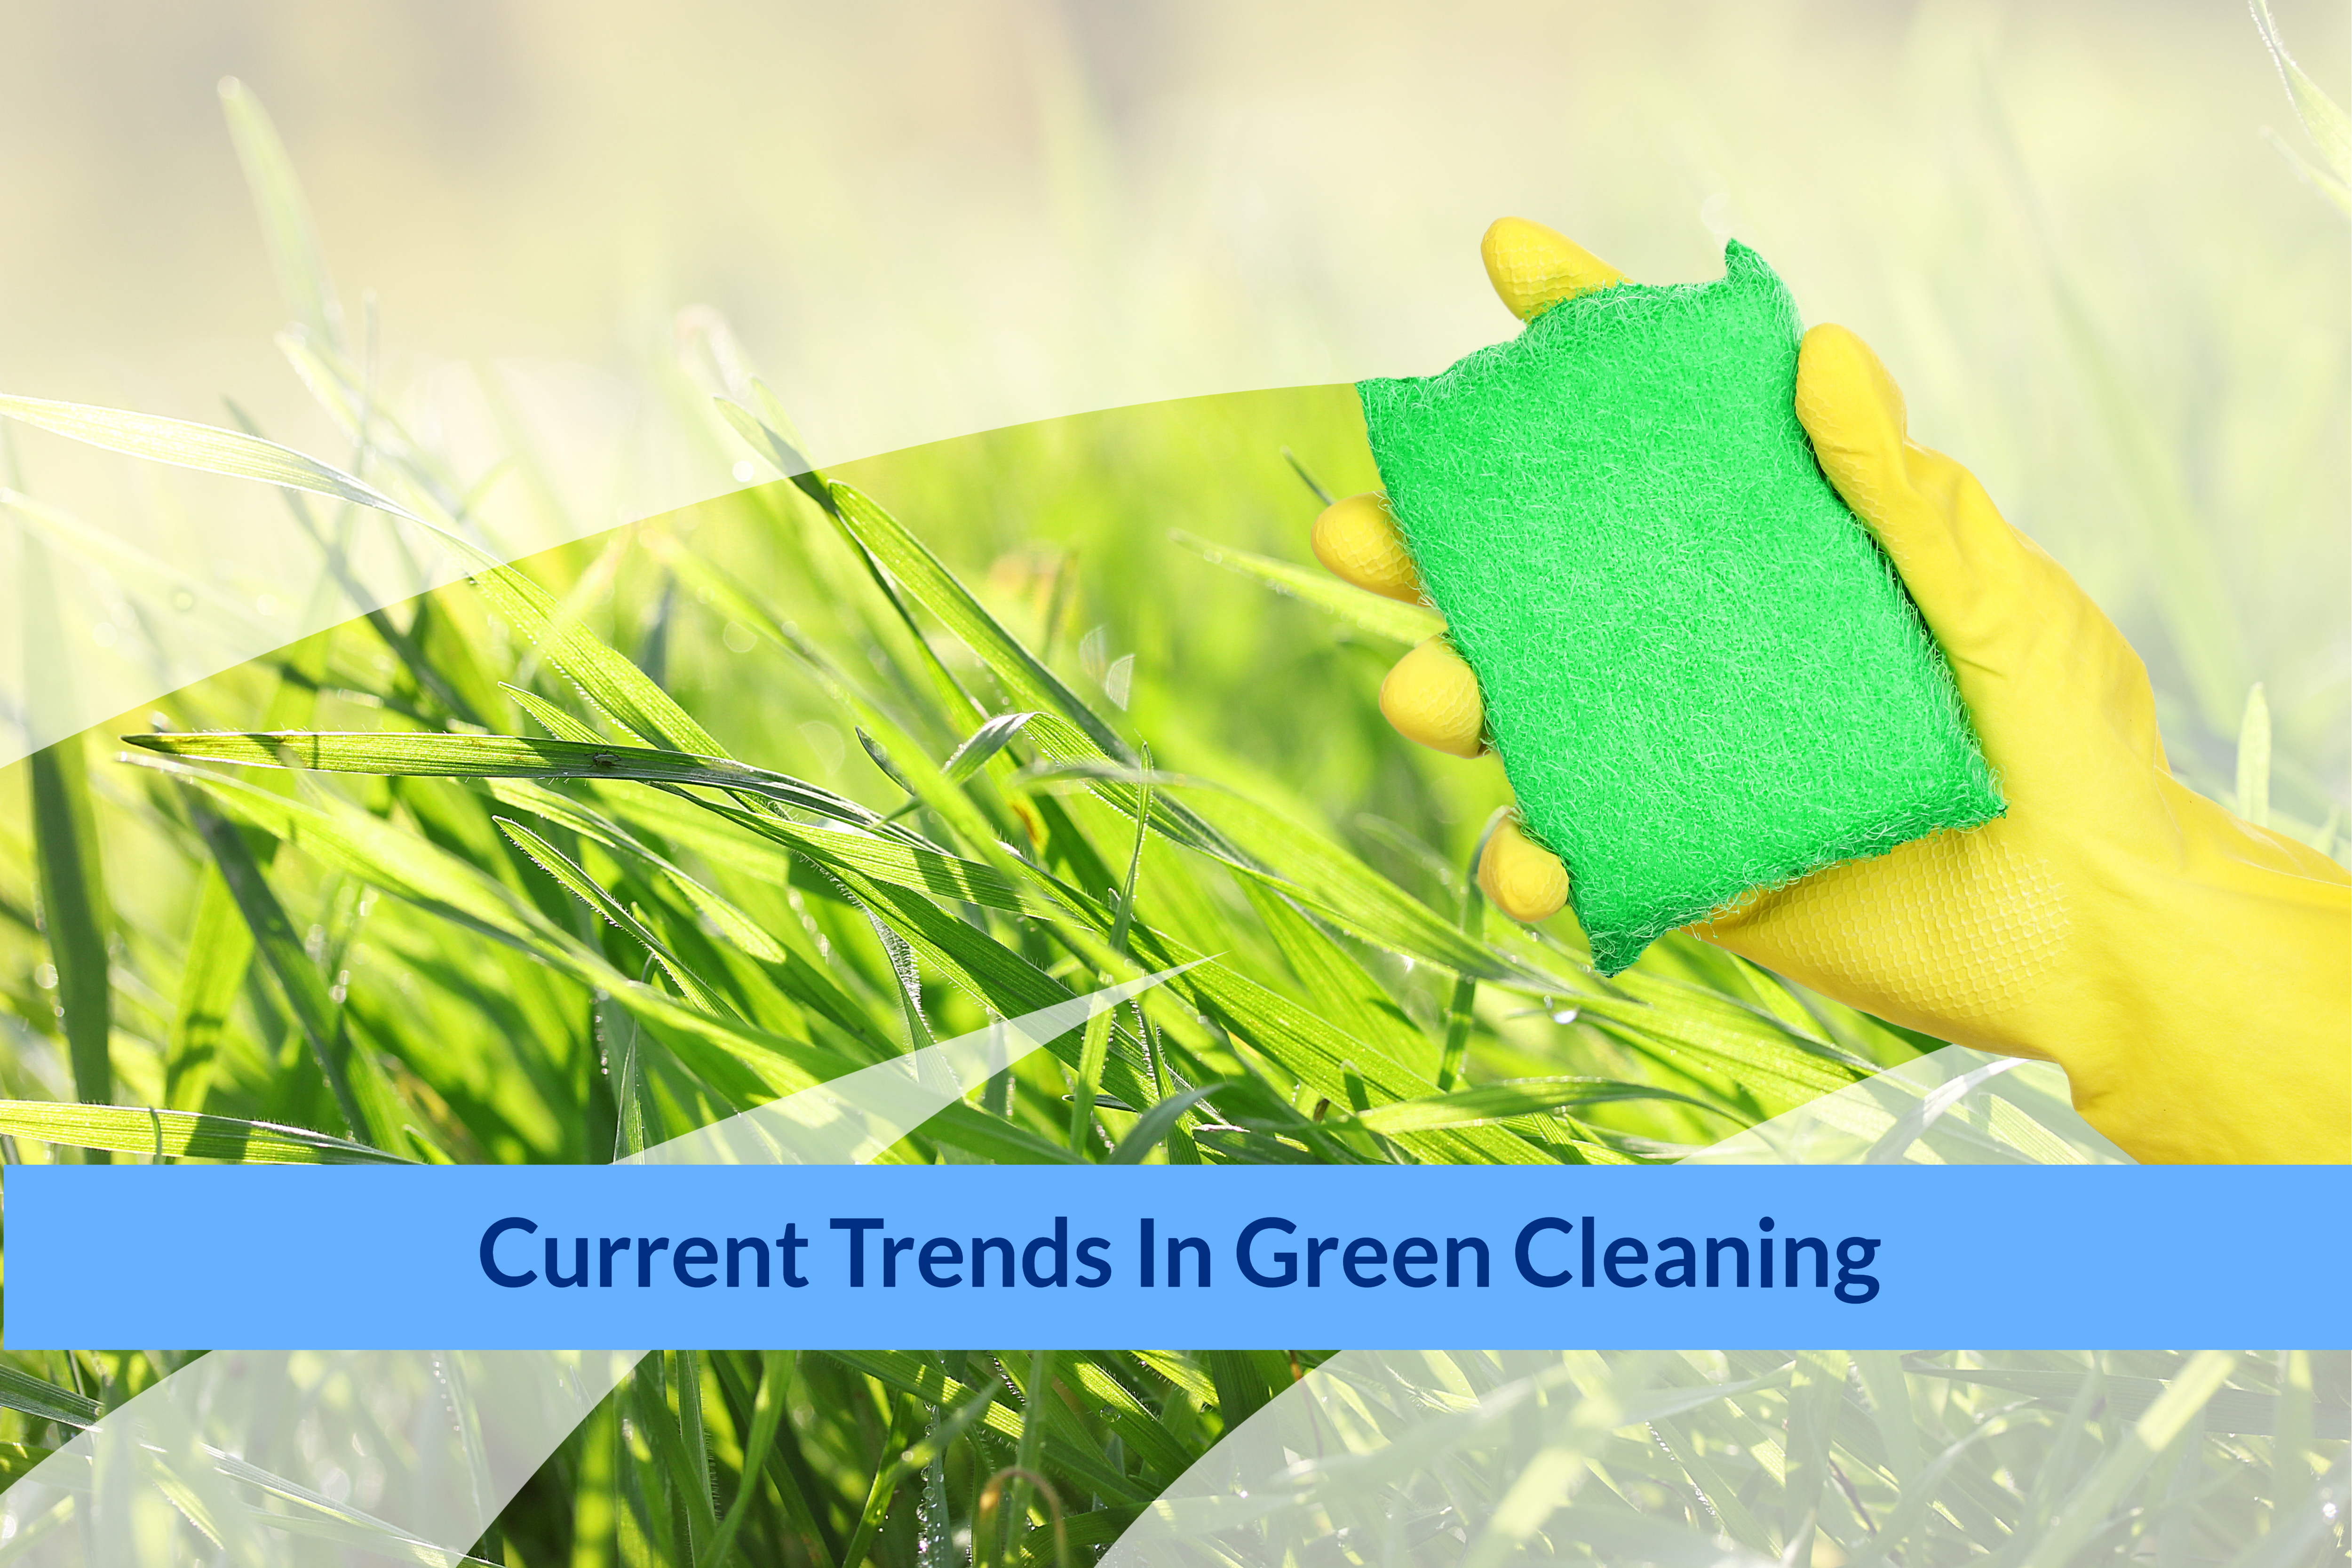 Current Trends In Green Cleaning